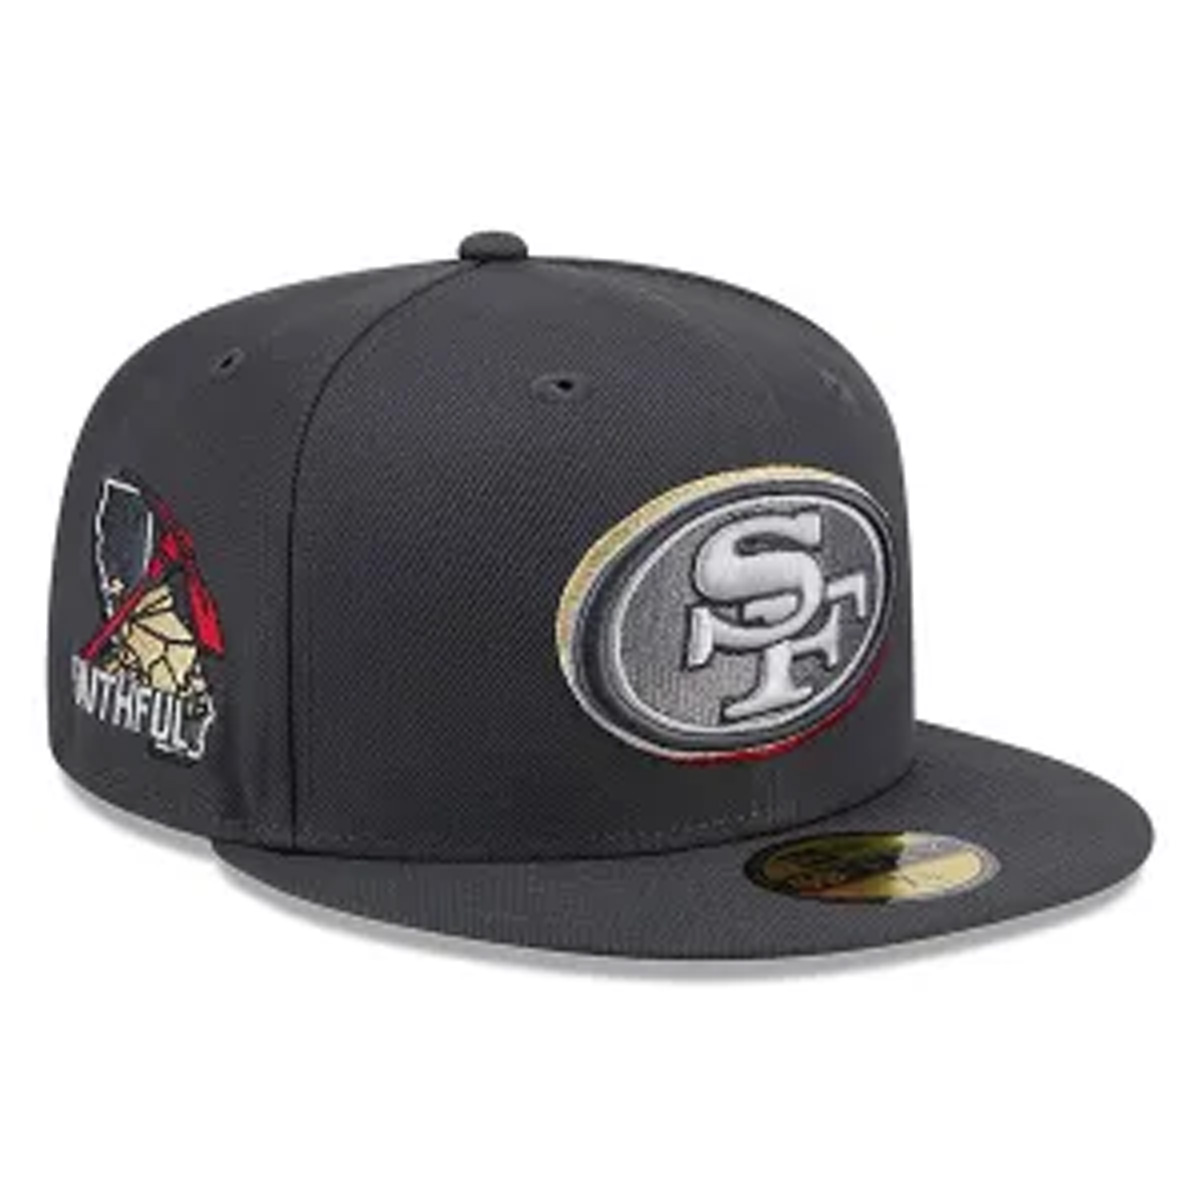 Check out the new San Francisco 49ers 2024 NFL Draft hat